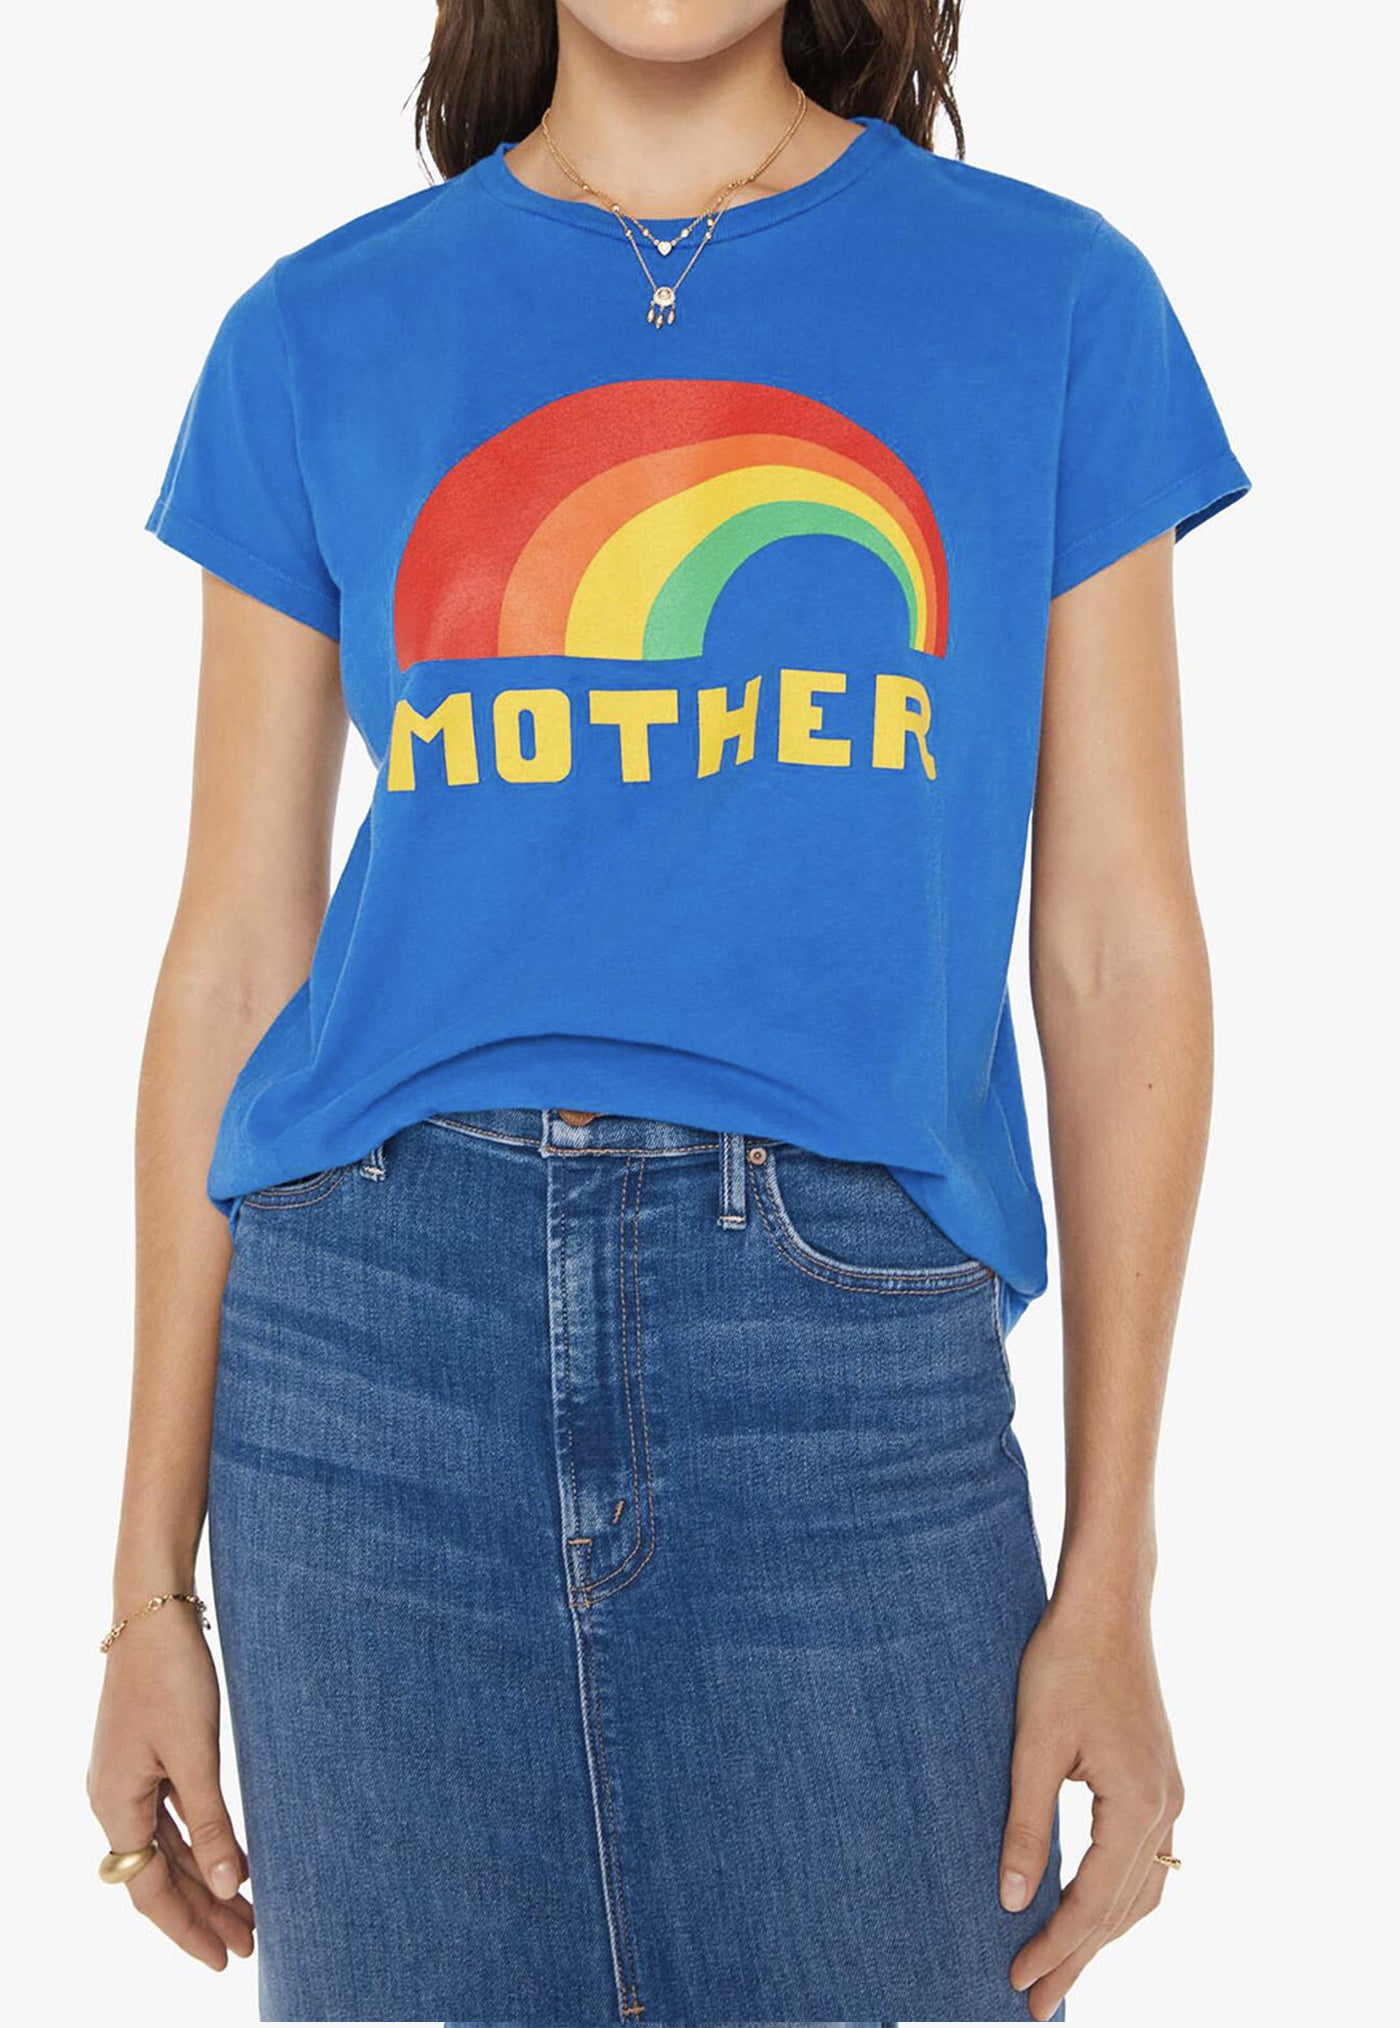 The Boxy Goodie Goodie Tee - Mother Rainbow sold by Angel Divine